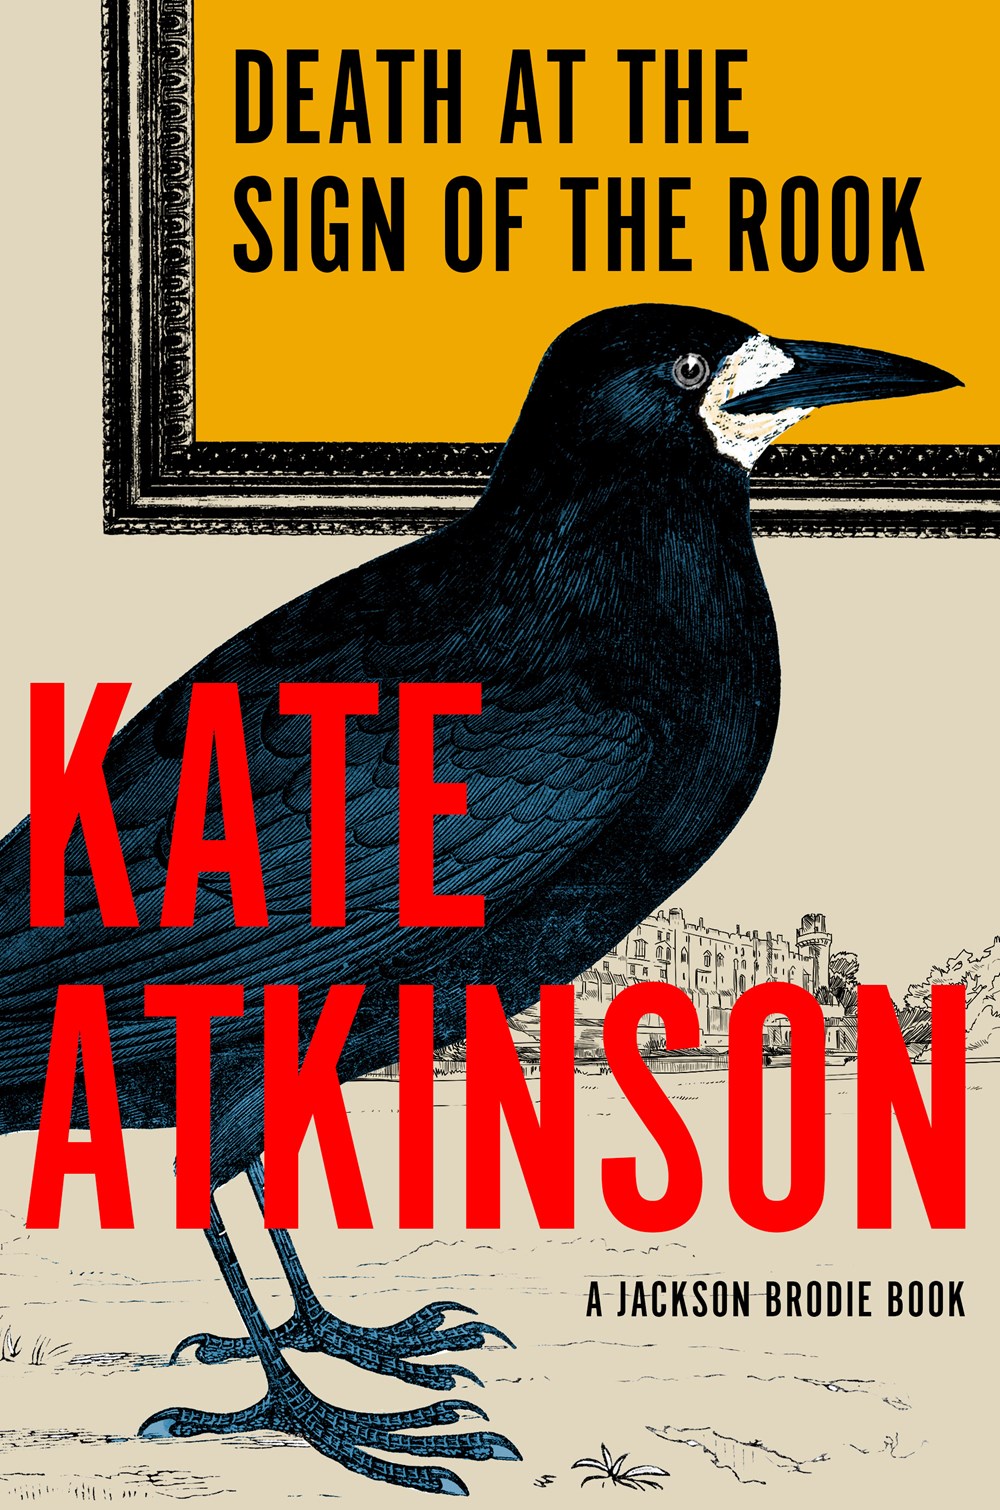 Death at the Sign of the Rook by Kate Atkinson (Jackson Brodie, Book 6) (9/3/24)